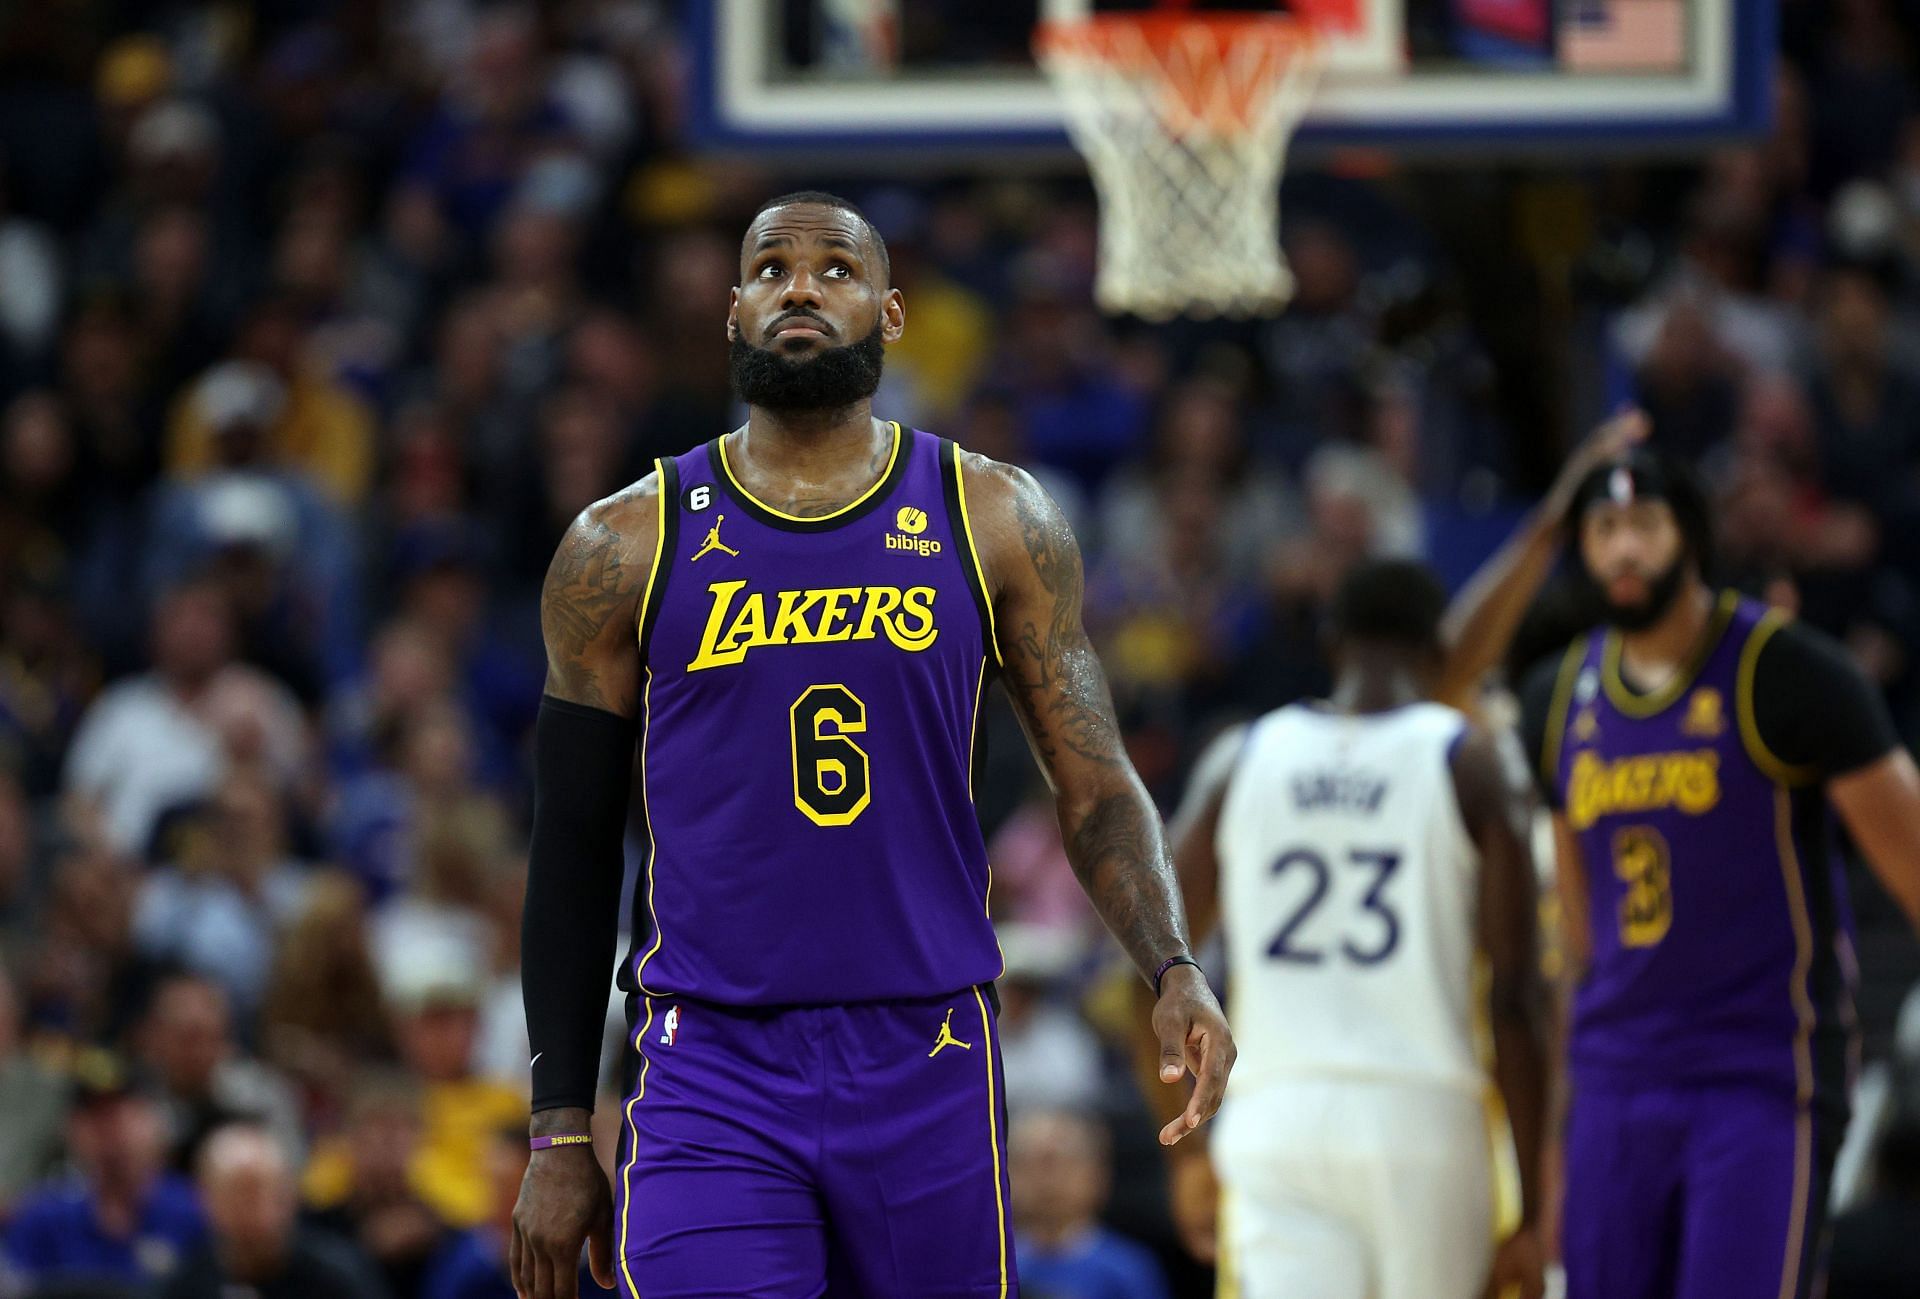 LeBron James Wearing 23 Is a Disgrace!”: Lakers Star's 'Michael Jordan  Reason' to Switch Jersey Numbers Has Skip Bayless Raging on Twitter - The  SportsRush